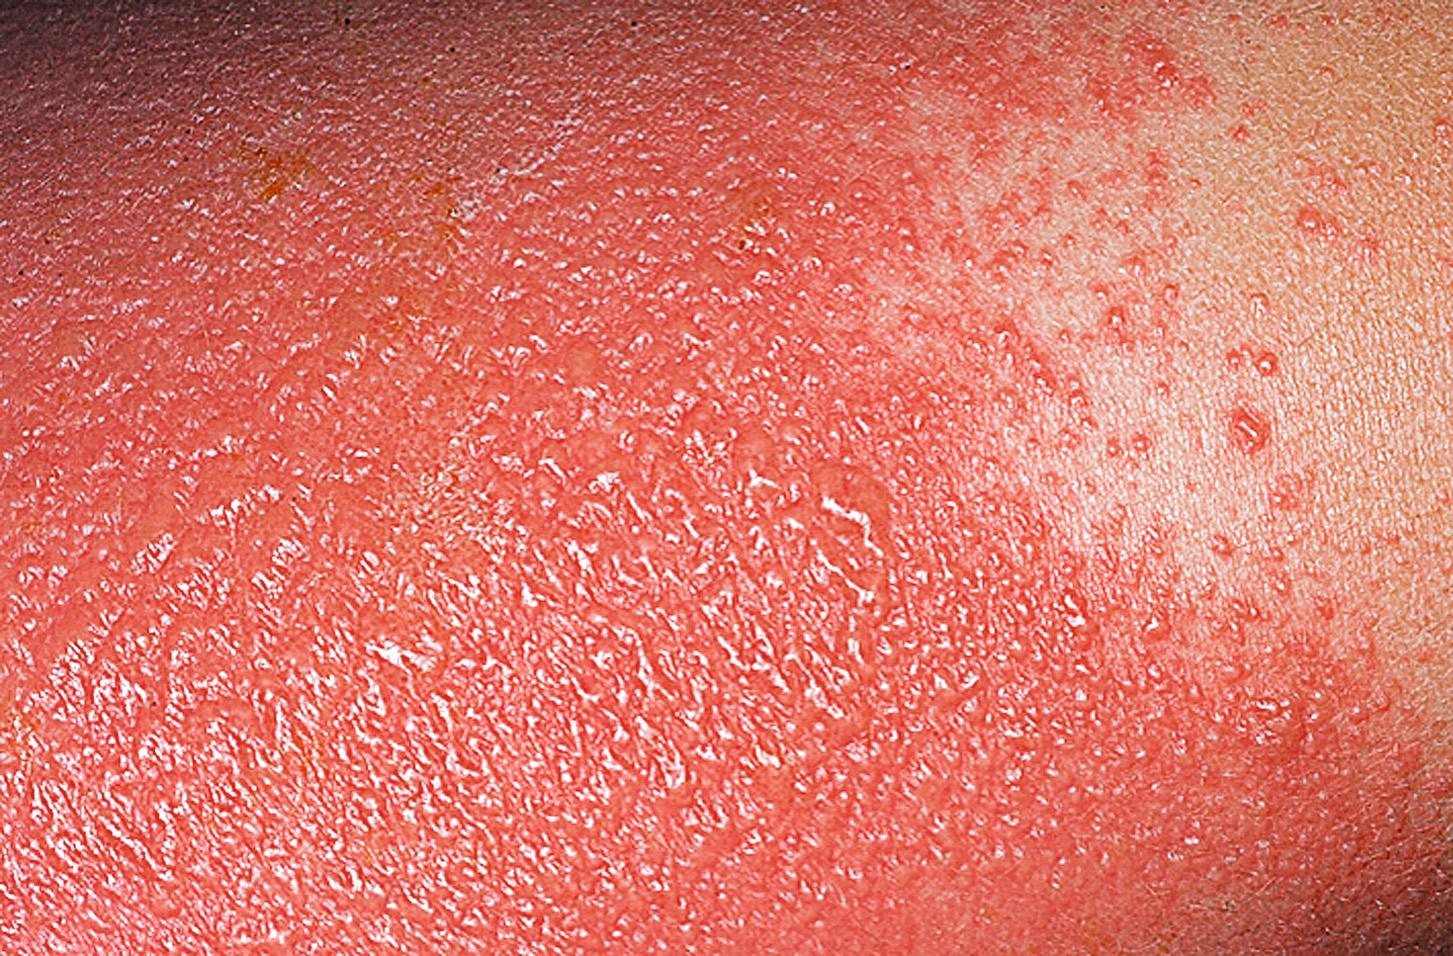 Fig. 2.5, Acute eczema. Poison ivy may cause intense acute eczematous inflammation. Vesicles and blisters form on a red base. The blisters may coalesce and become very large. The itching is unbearable and is best controlled with cold wet dressings.